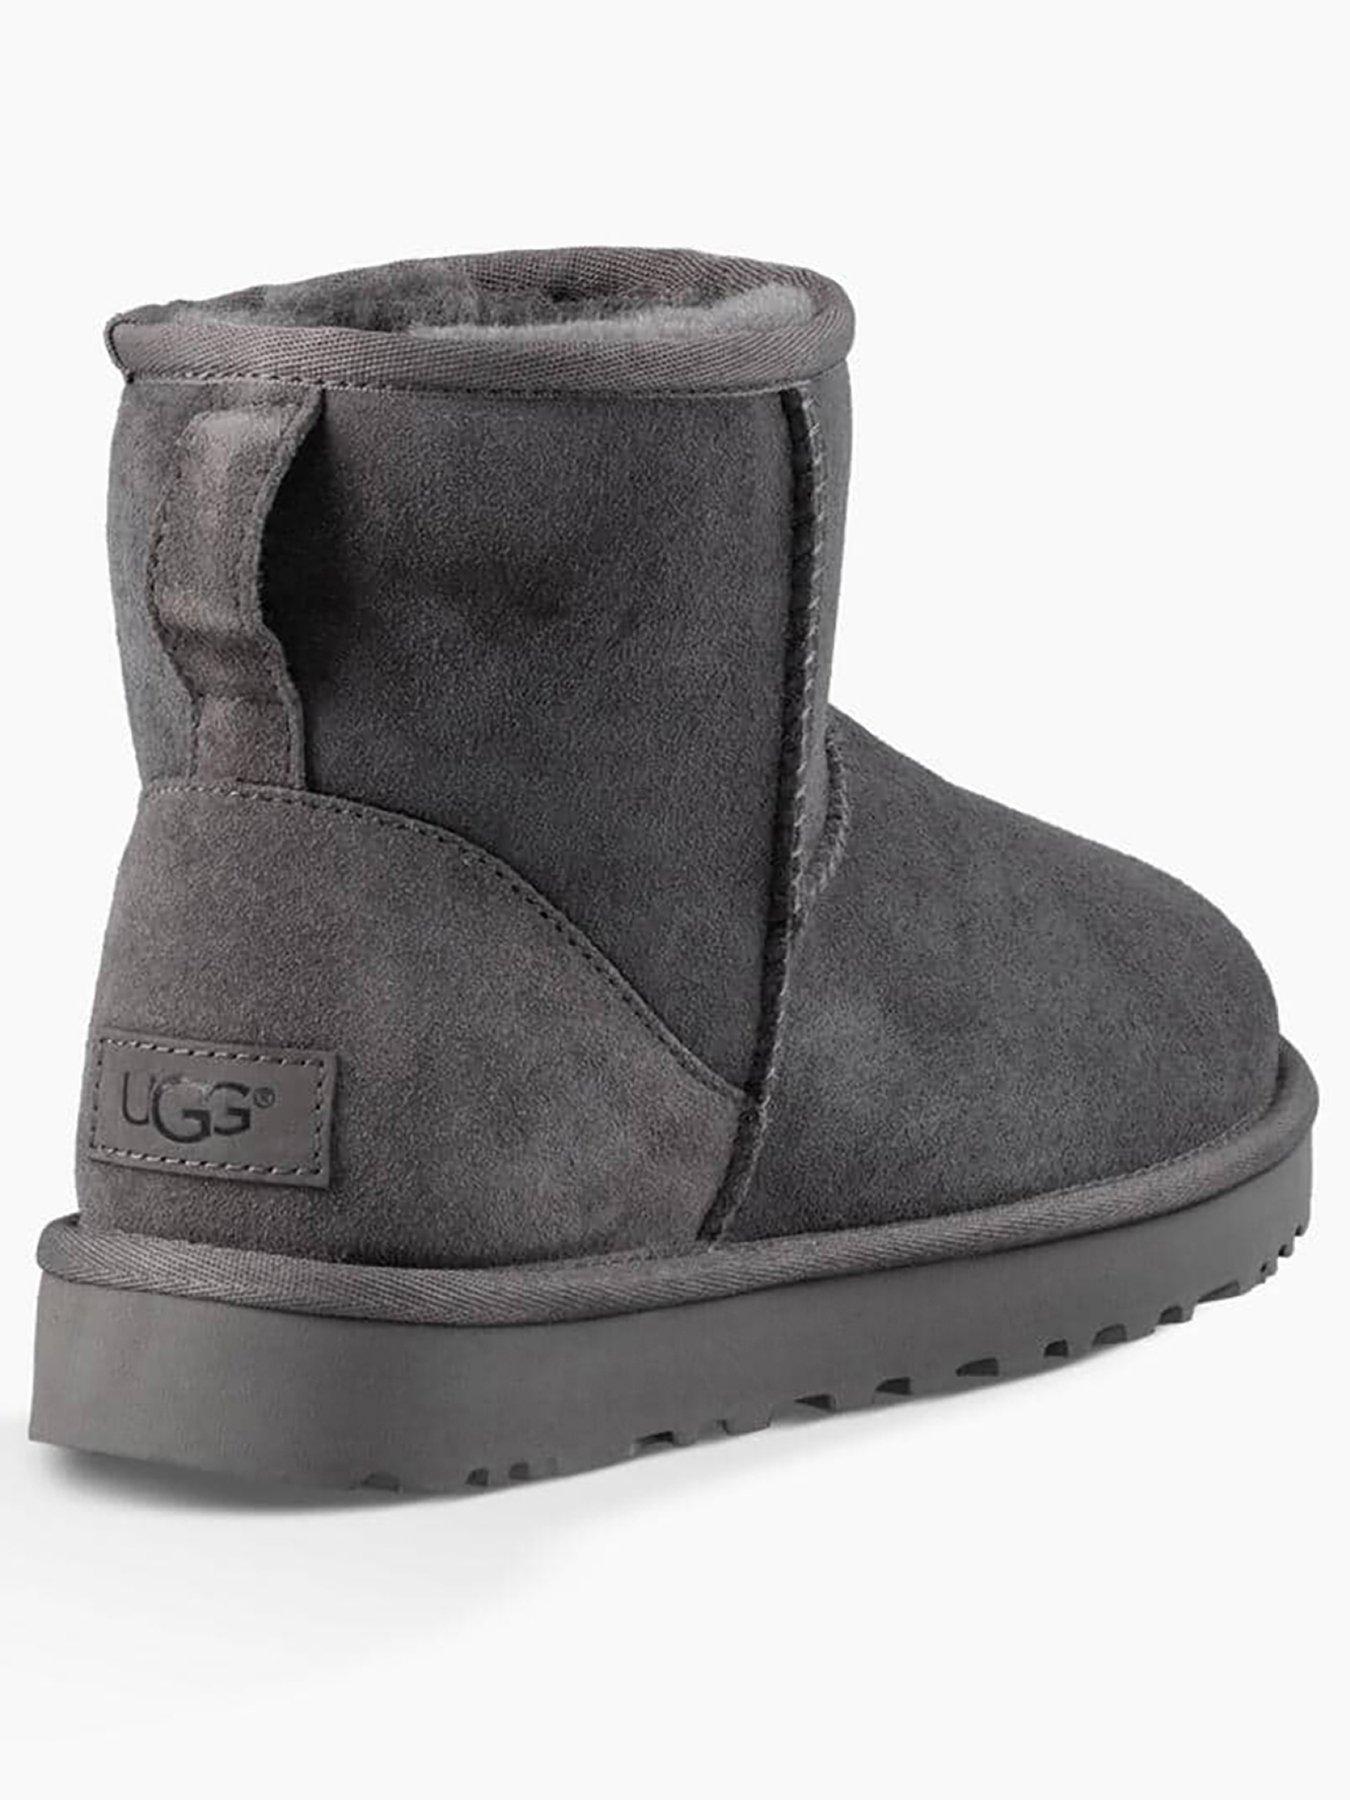 grey ankle uggs